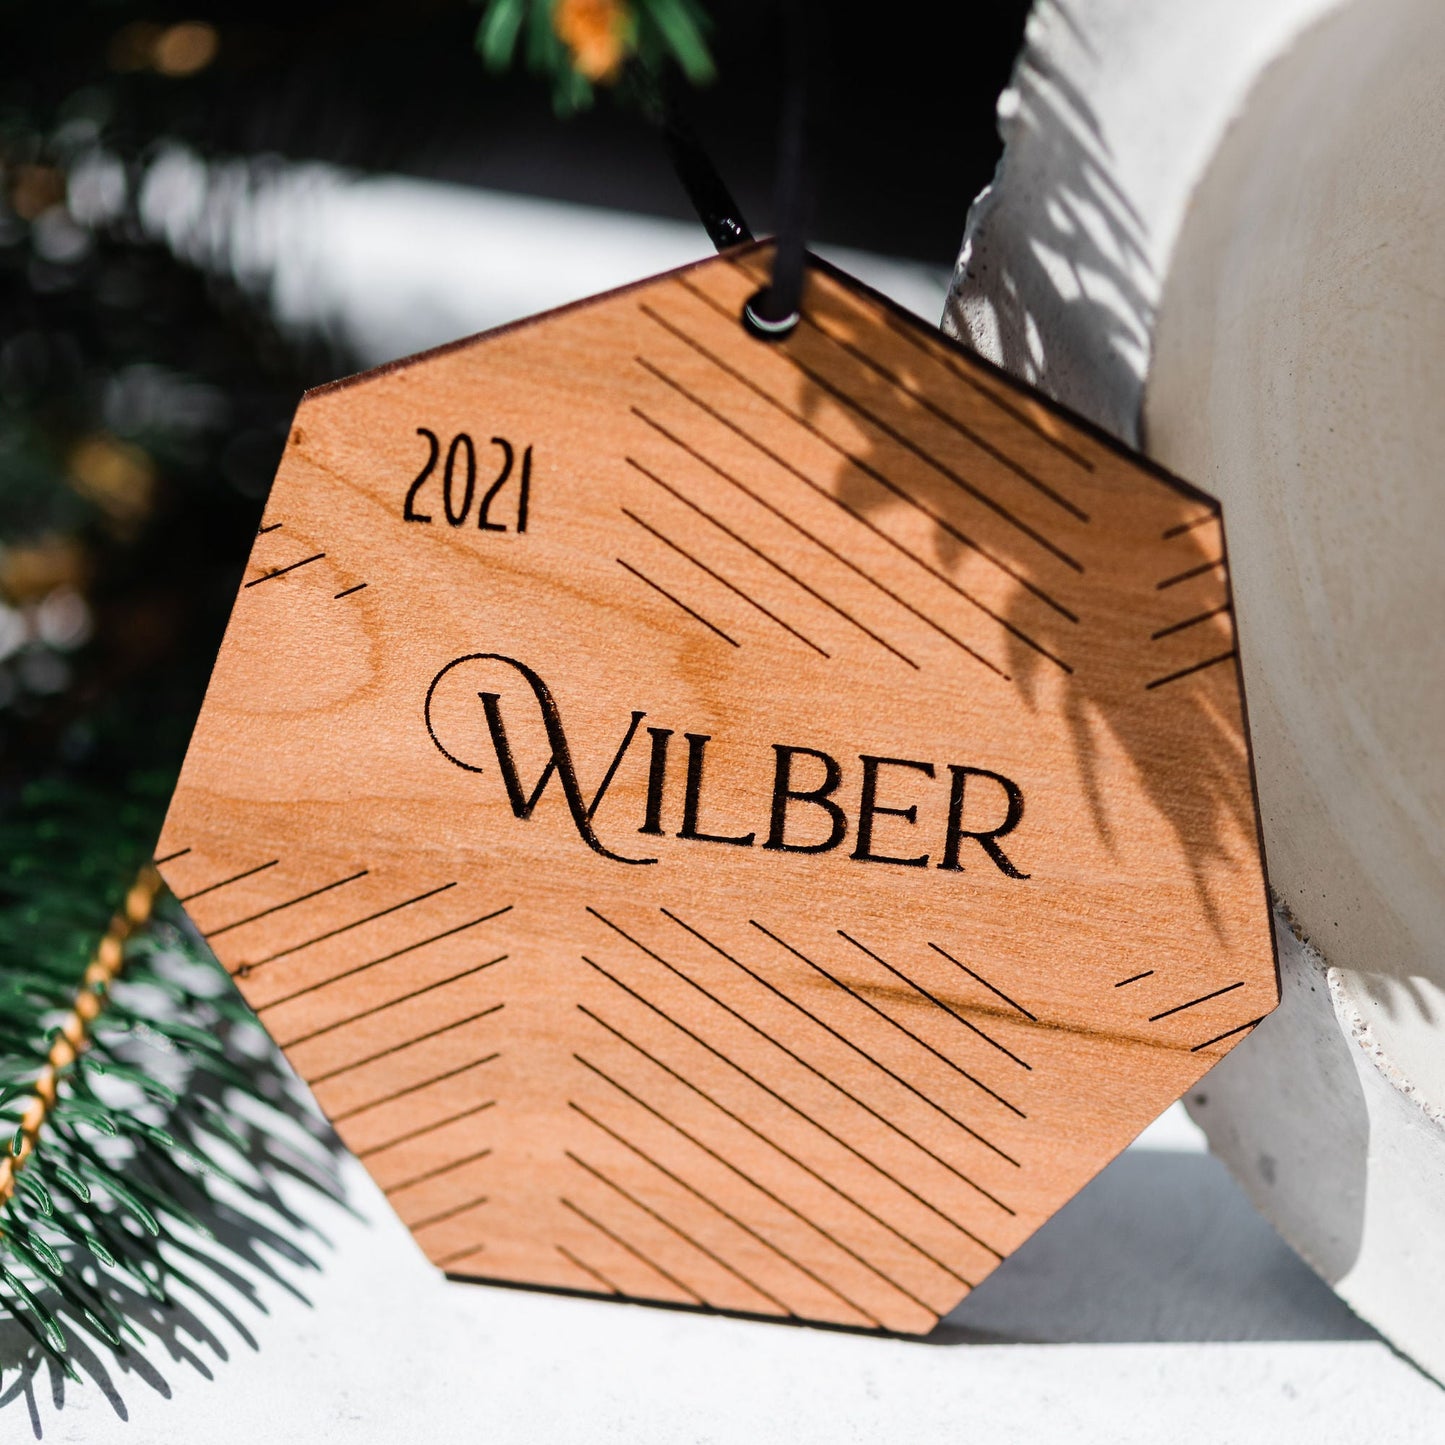 Custom Wood Ornaments: Heptagon Lines - Laser Cut and Laser Engraved Cherry Wood by LeeMo Designs in Bend, Oregon